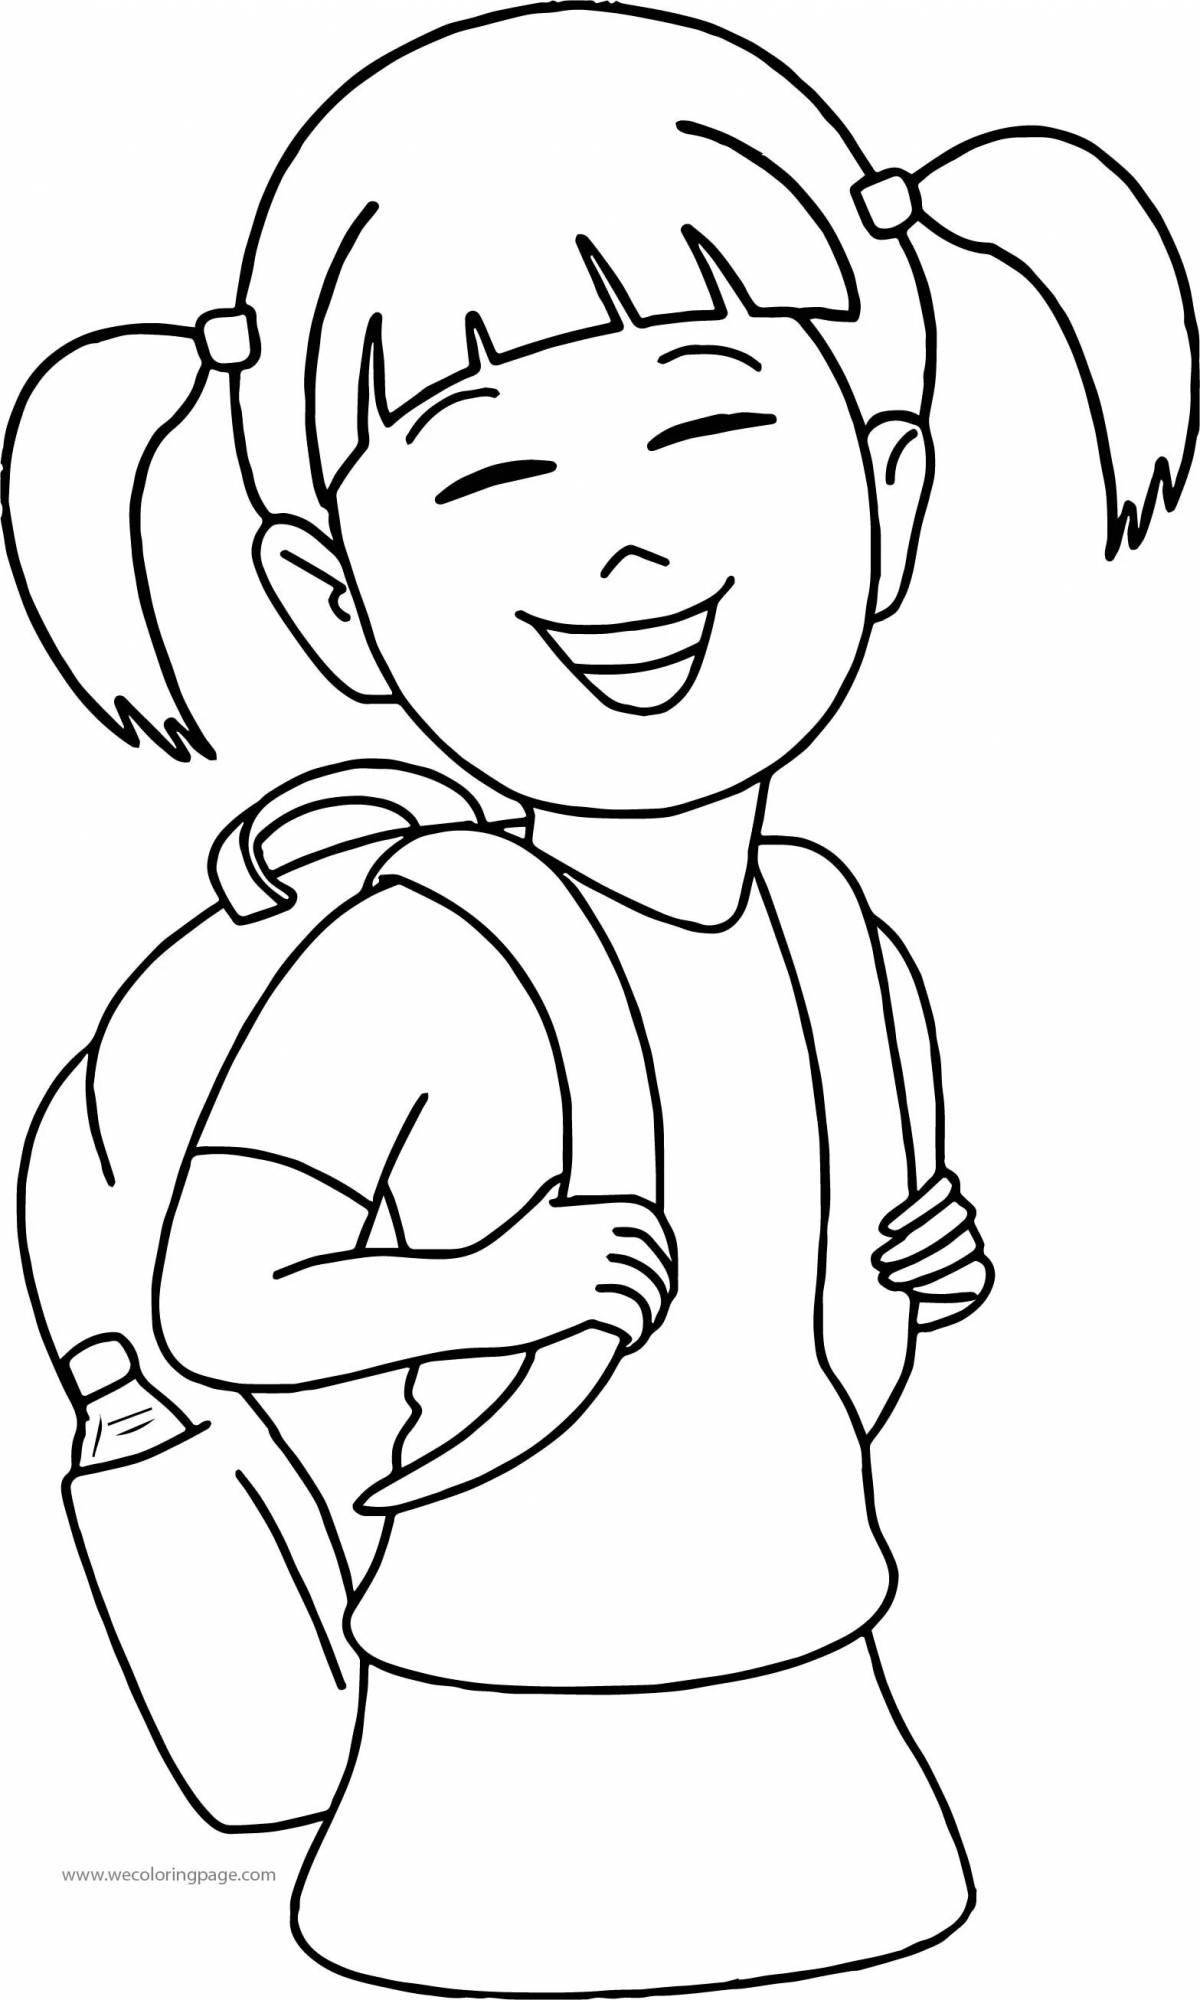 Coloring page cheerful schoolgirl